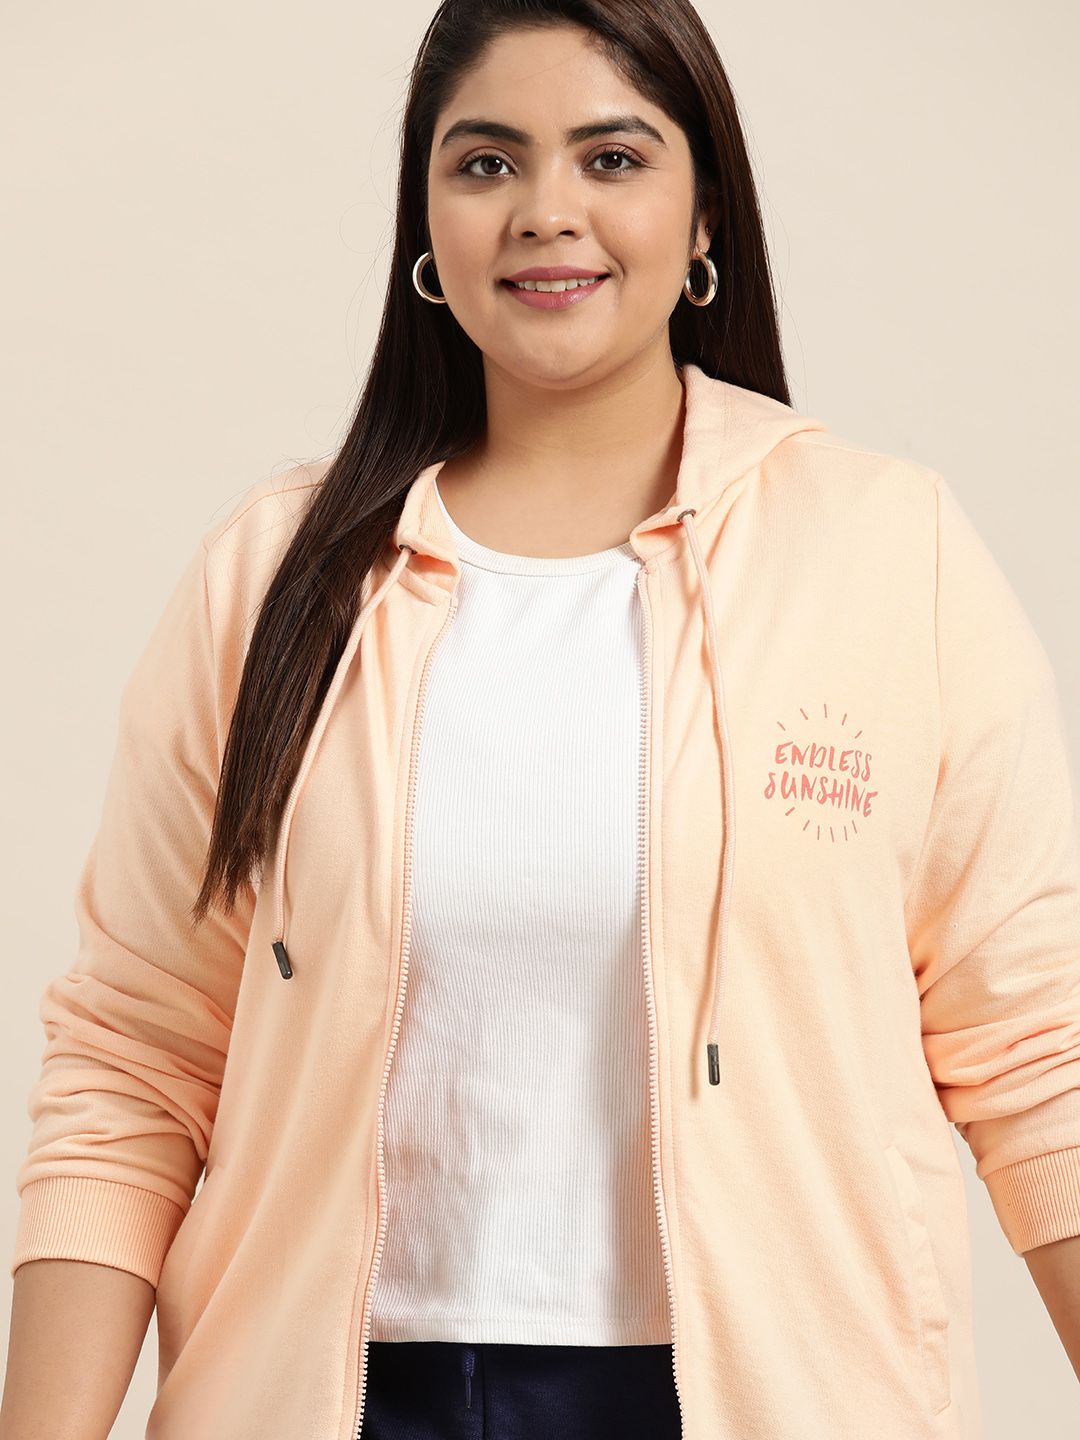 Sztori Women Plus Size Peach-Coloured Hooded Sweatshirt with Printed Back Price in India